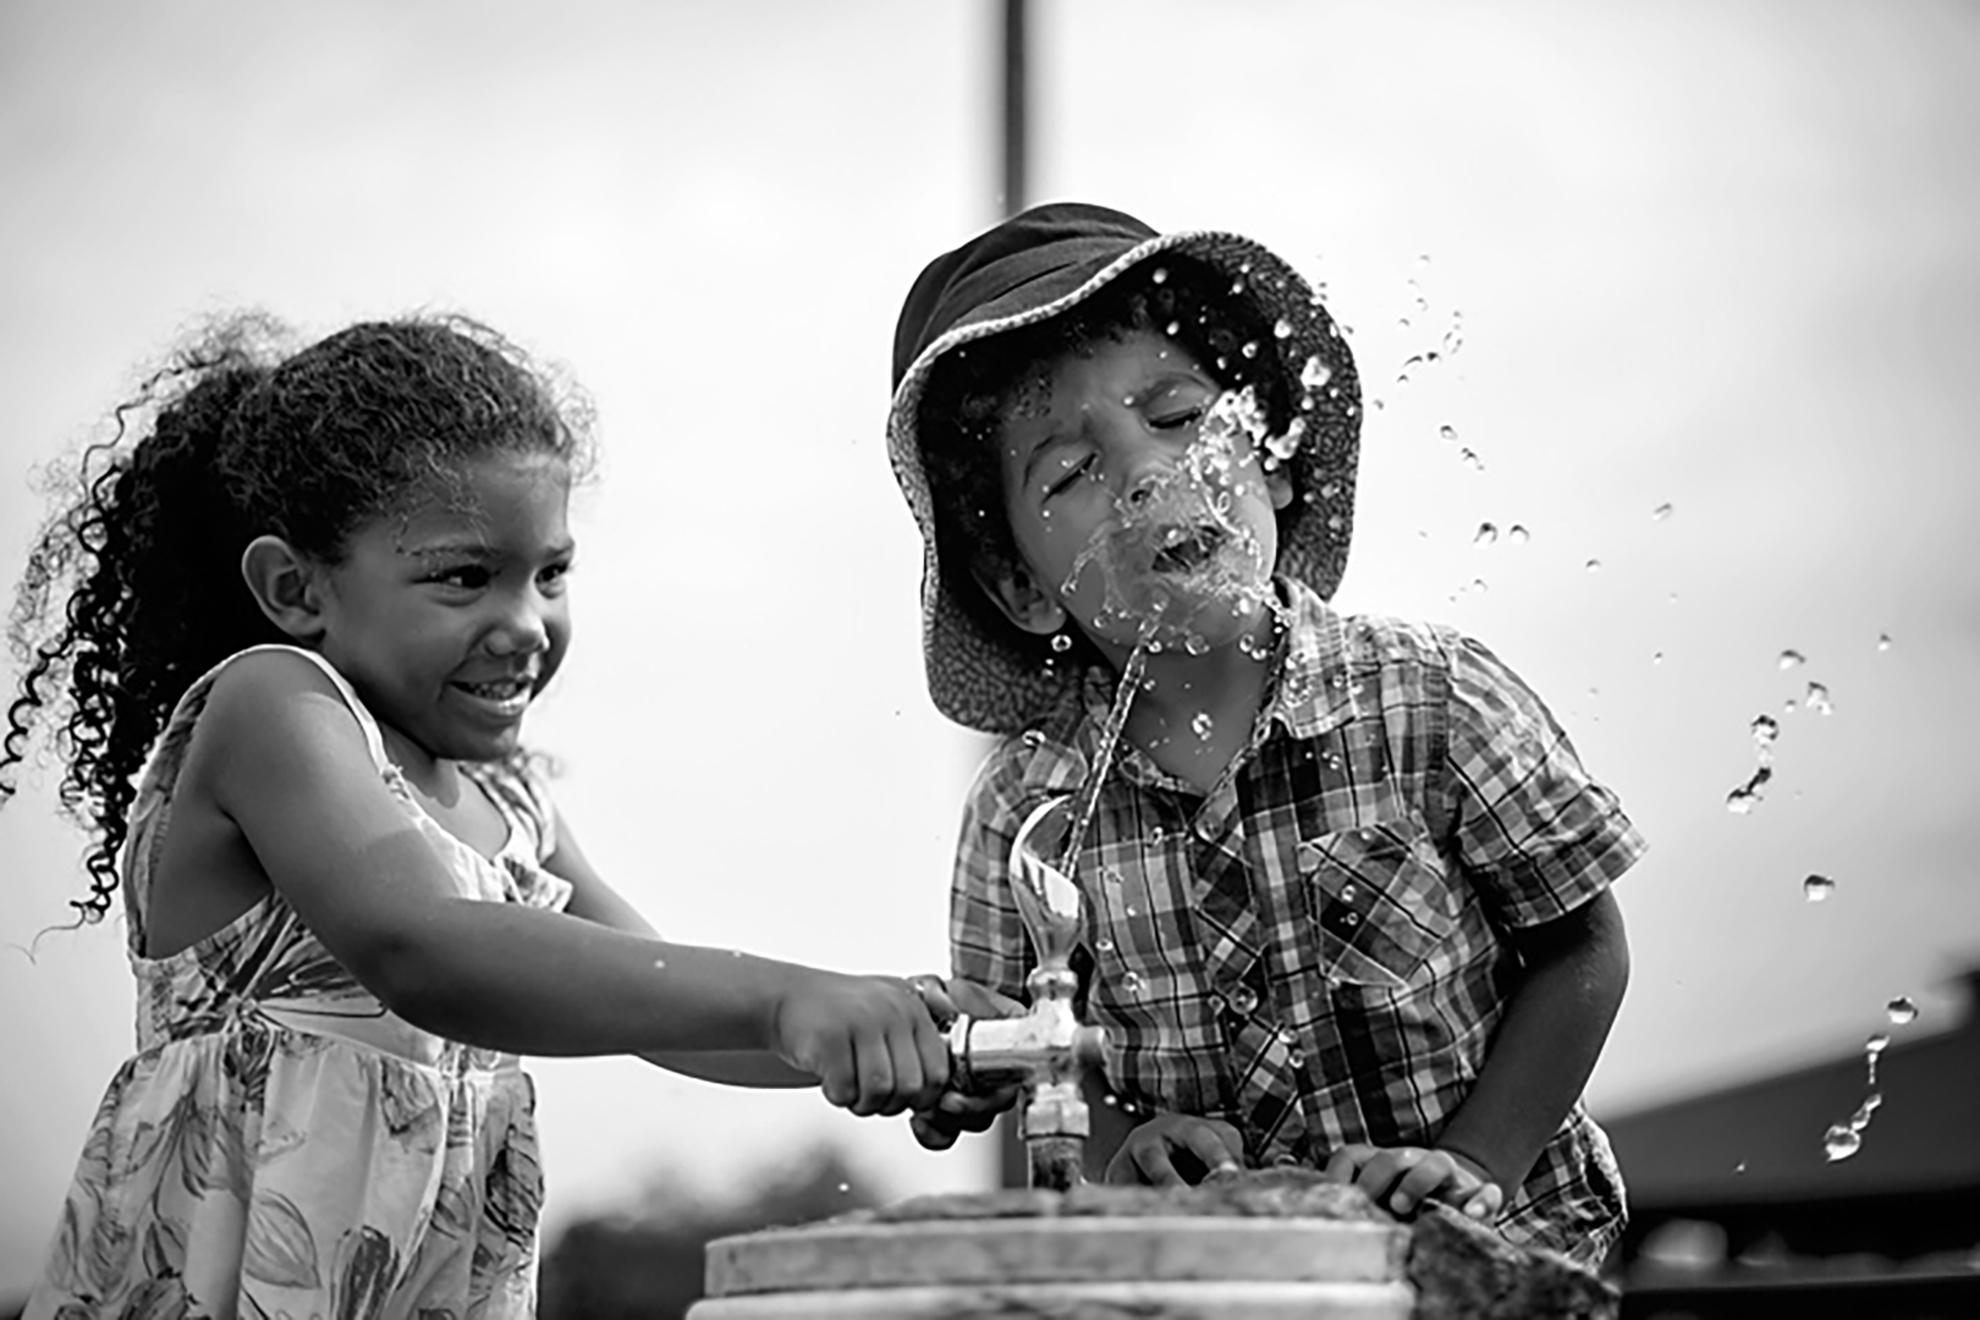 little girl spraying water fountain water into a little boy's face